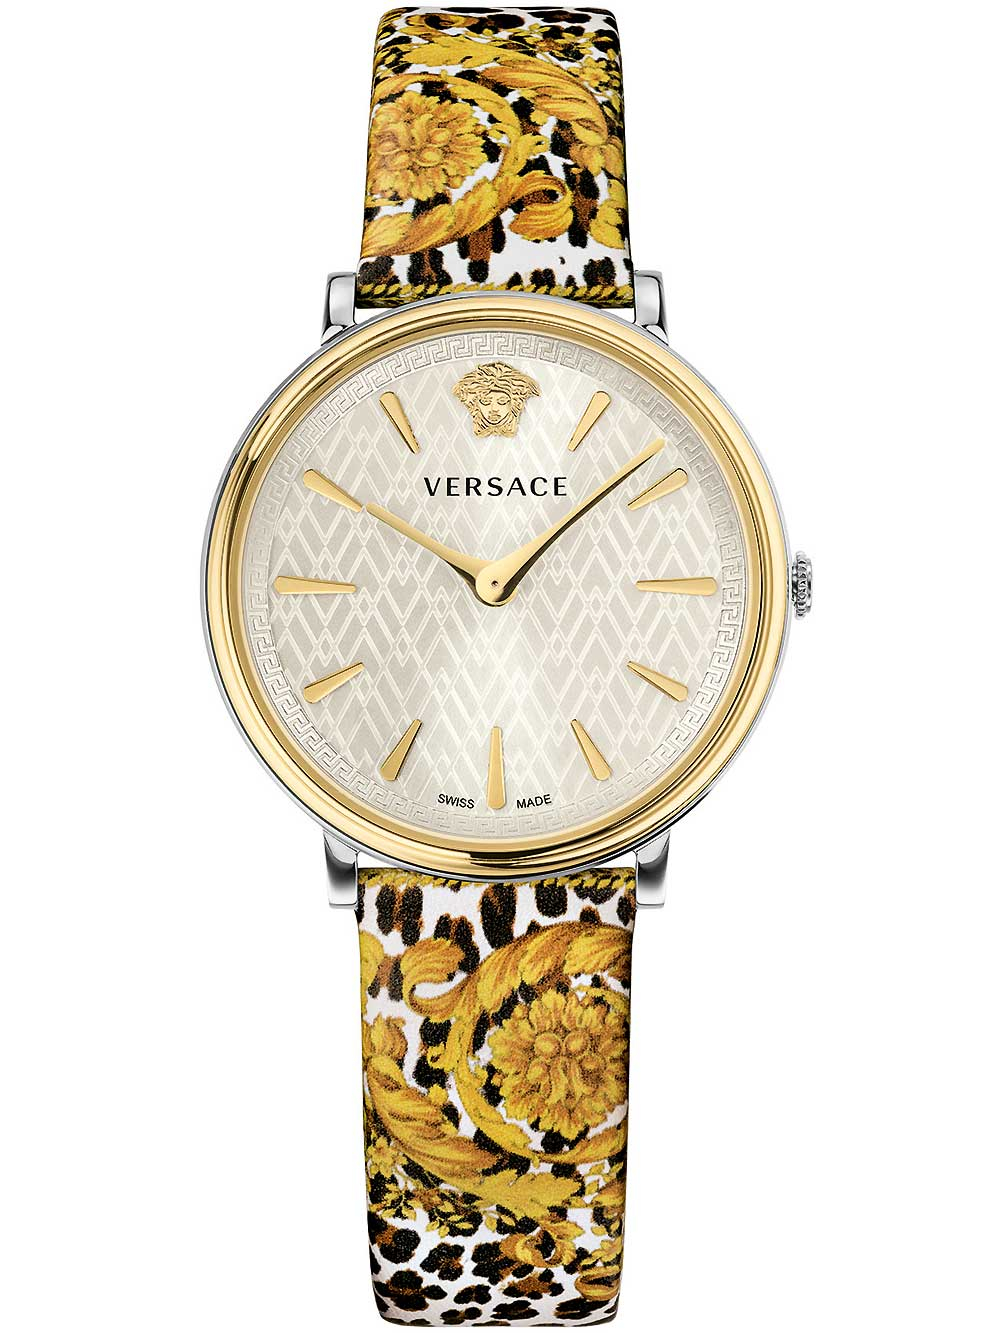 Versace VBP120017 V-Circle ladies watch 36mm 5ATM BY Versace - Wristwatch available at DOYUF